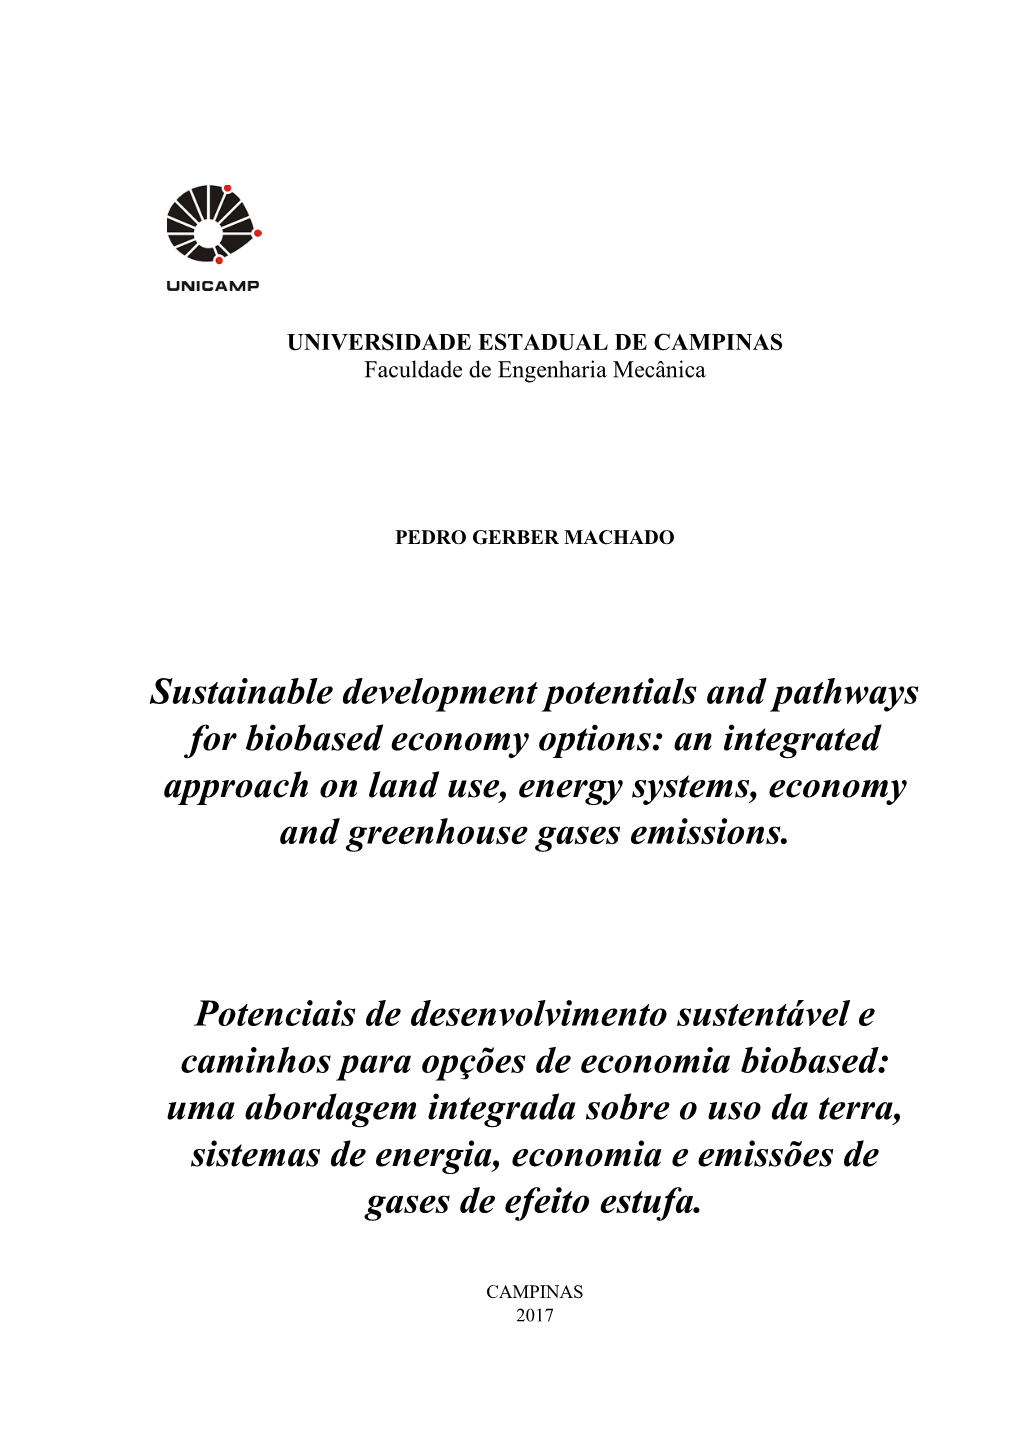 An Integrated Approach on Land Use, Energy Systems, Economy and Greenhouse Gases Emissions